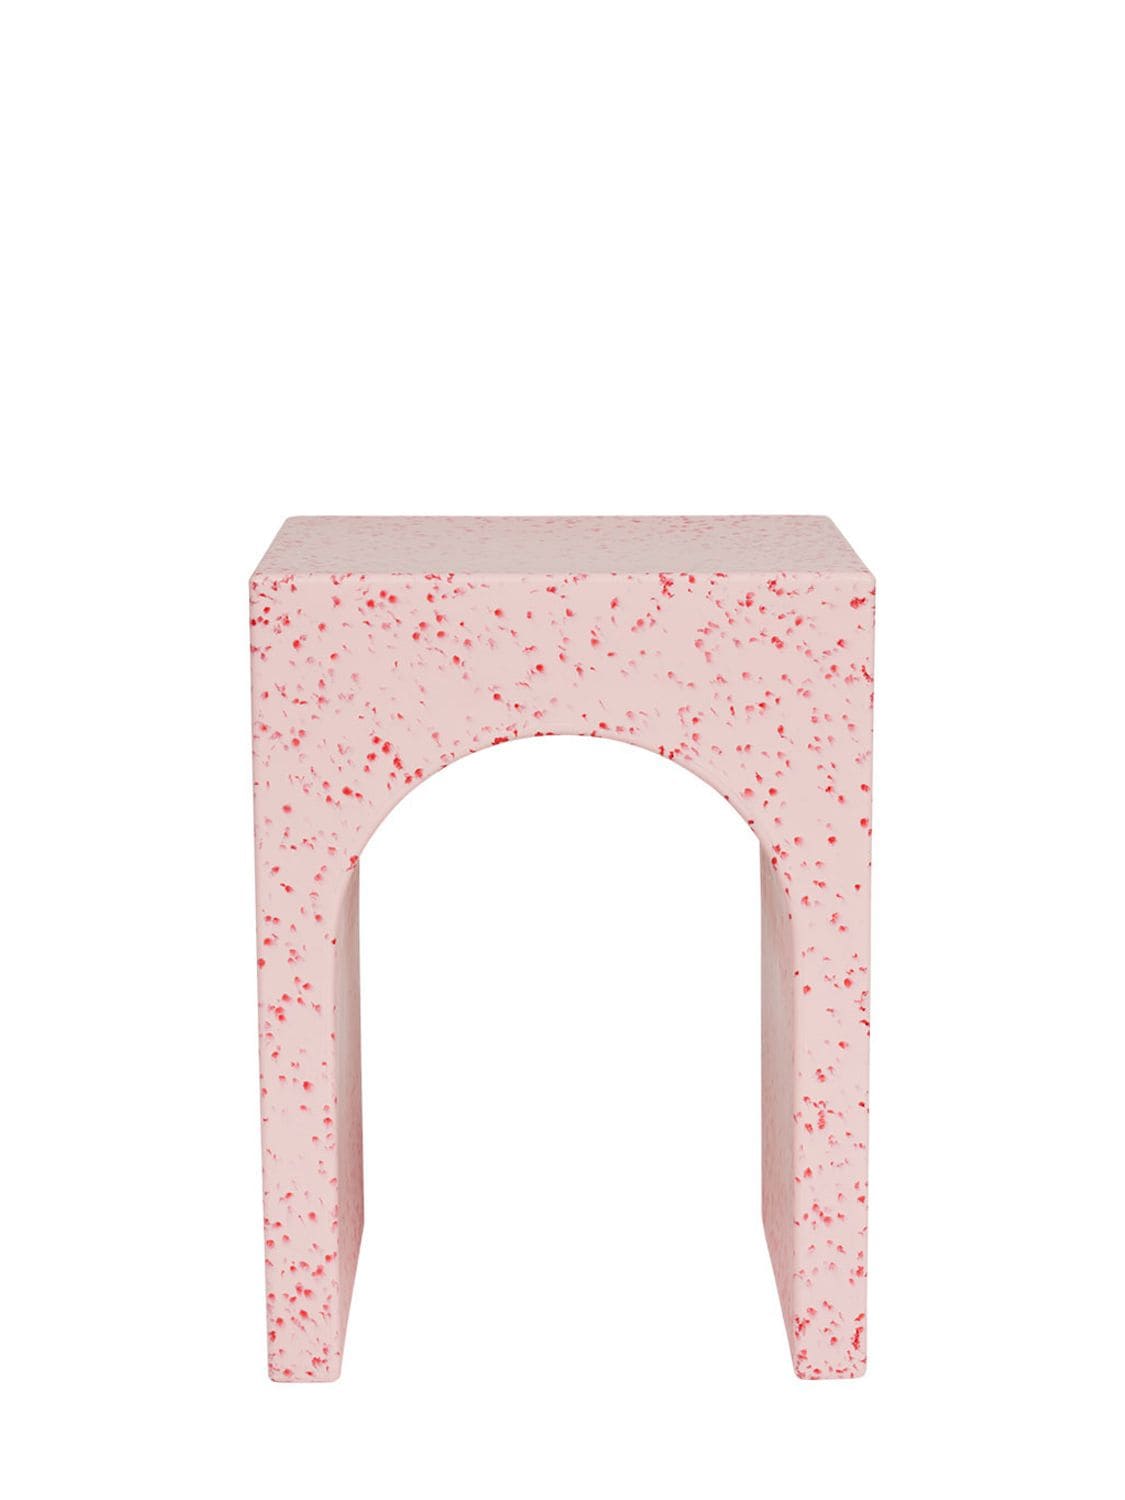 Oyoy Siltaa Recycled Stool In Pink